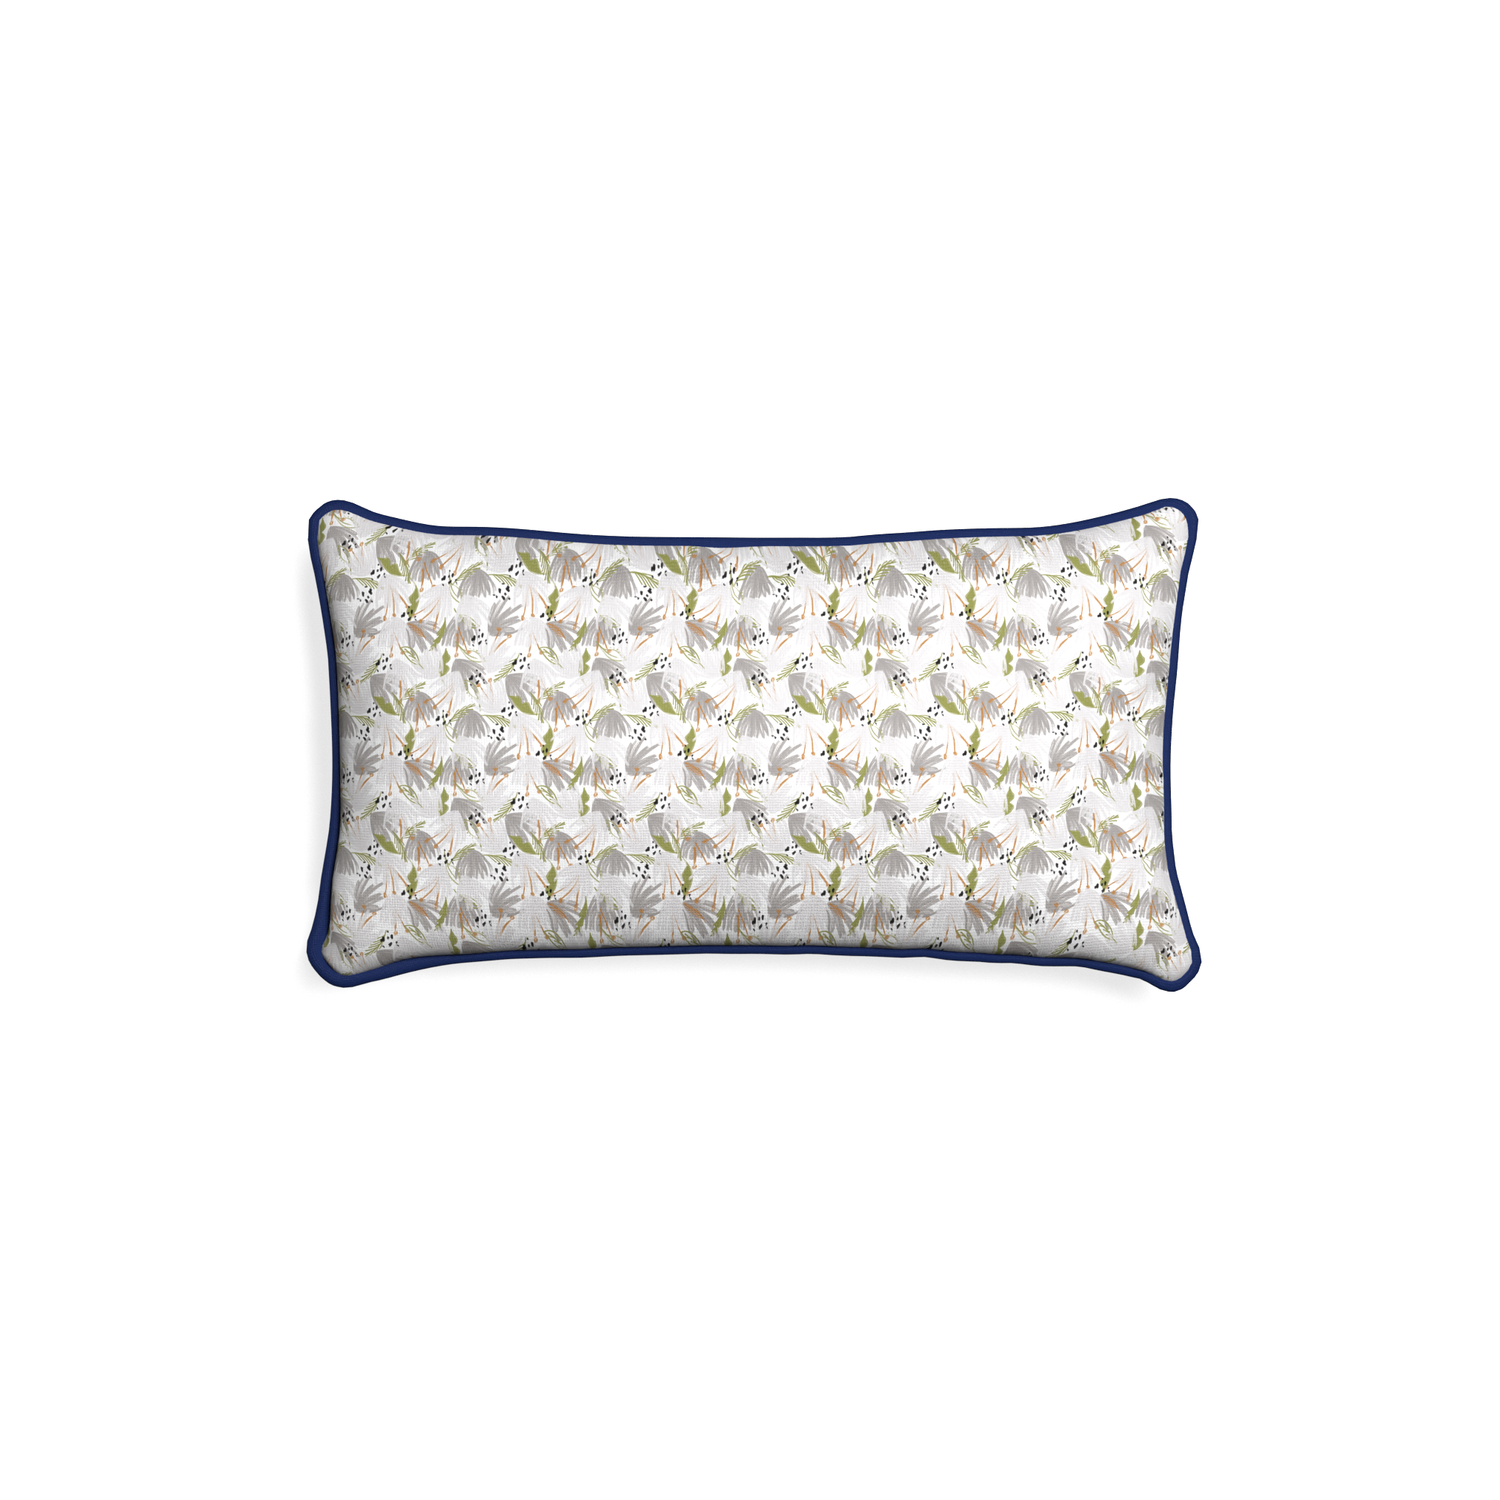 Petite-lumbar eden grey custom grey floralpillow with midnight piping on white background